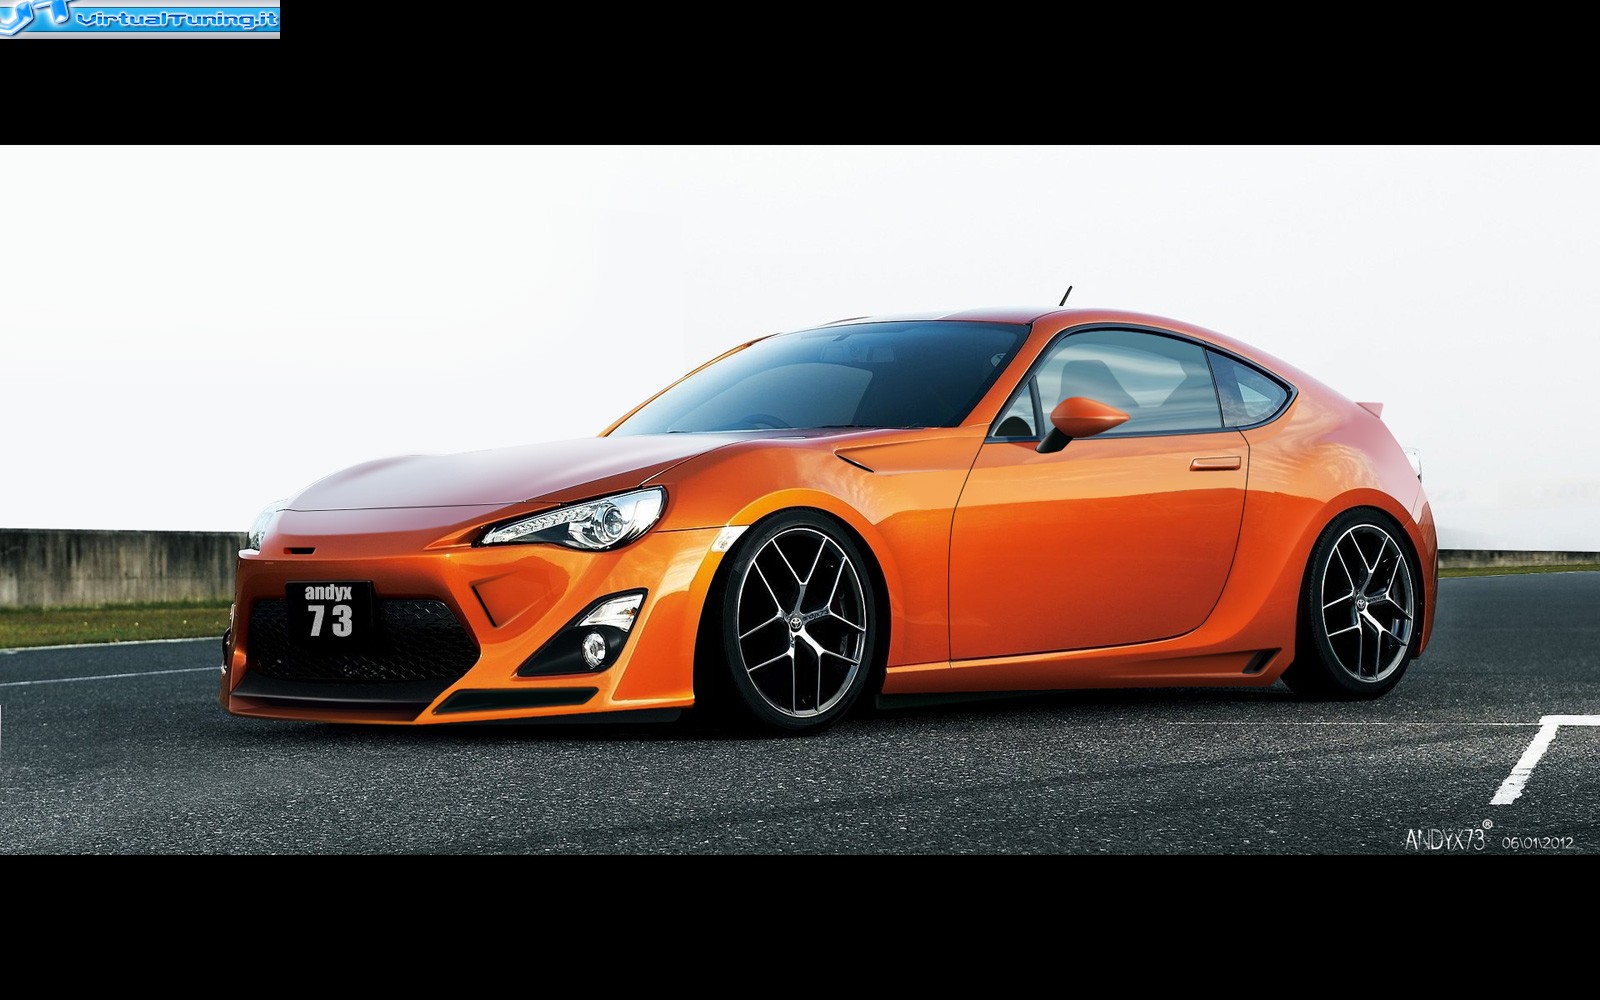 VirtualTuning TOYOTA GT 86 by 